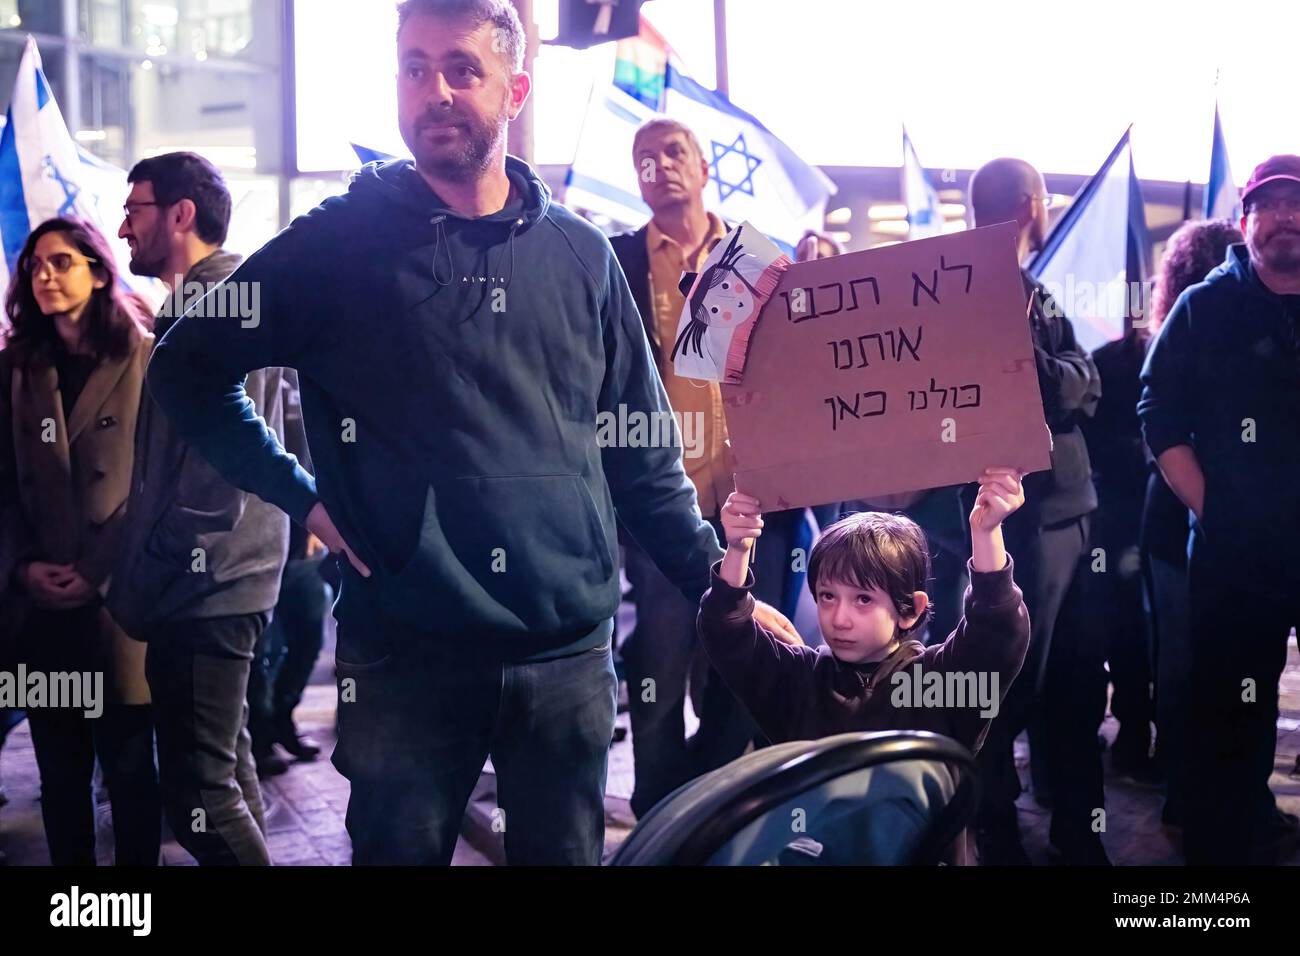 Tel Aviv, Israel. 28th Jan, 2023. A young boy holds a placard that states ìYou wont turn us off, weíre all hereî during the demonstration. Over 100,000 people protested in Tel Aviv against Netanyahu's far-right government and judicial overhaul, a day after two deadly terror attacks in Jerusalem. (Photo by Matan Golan/SOPA Images/Sipa USA) Credit: Sipa USA/Alamy Live News Stock Photo